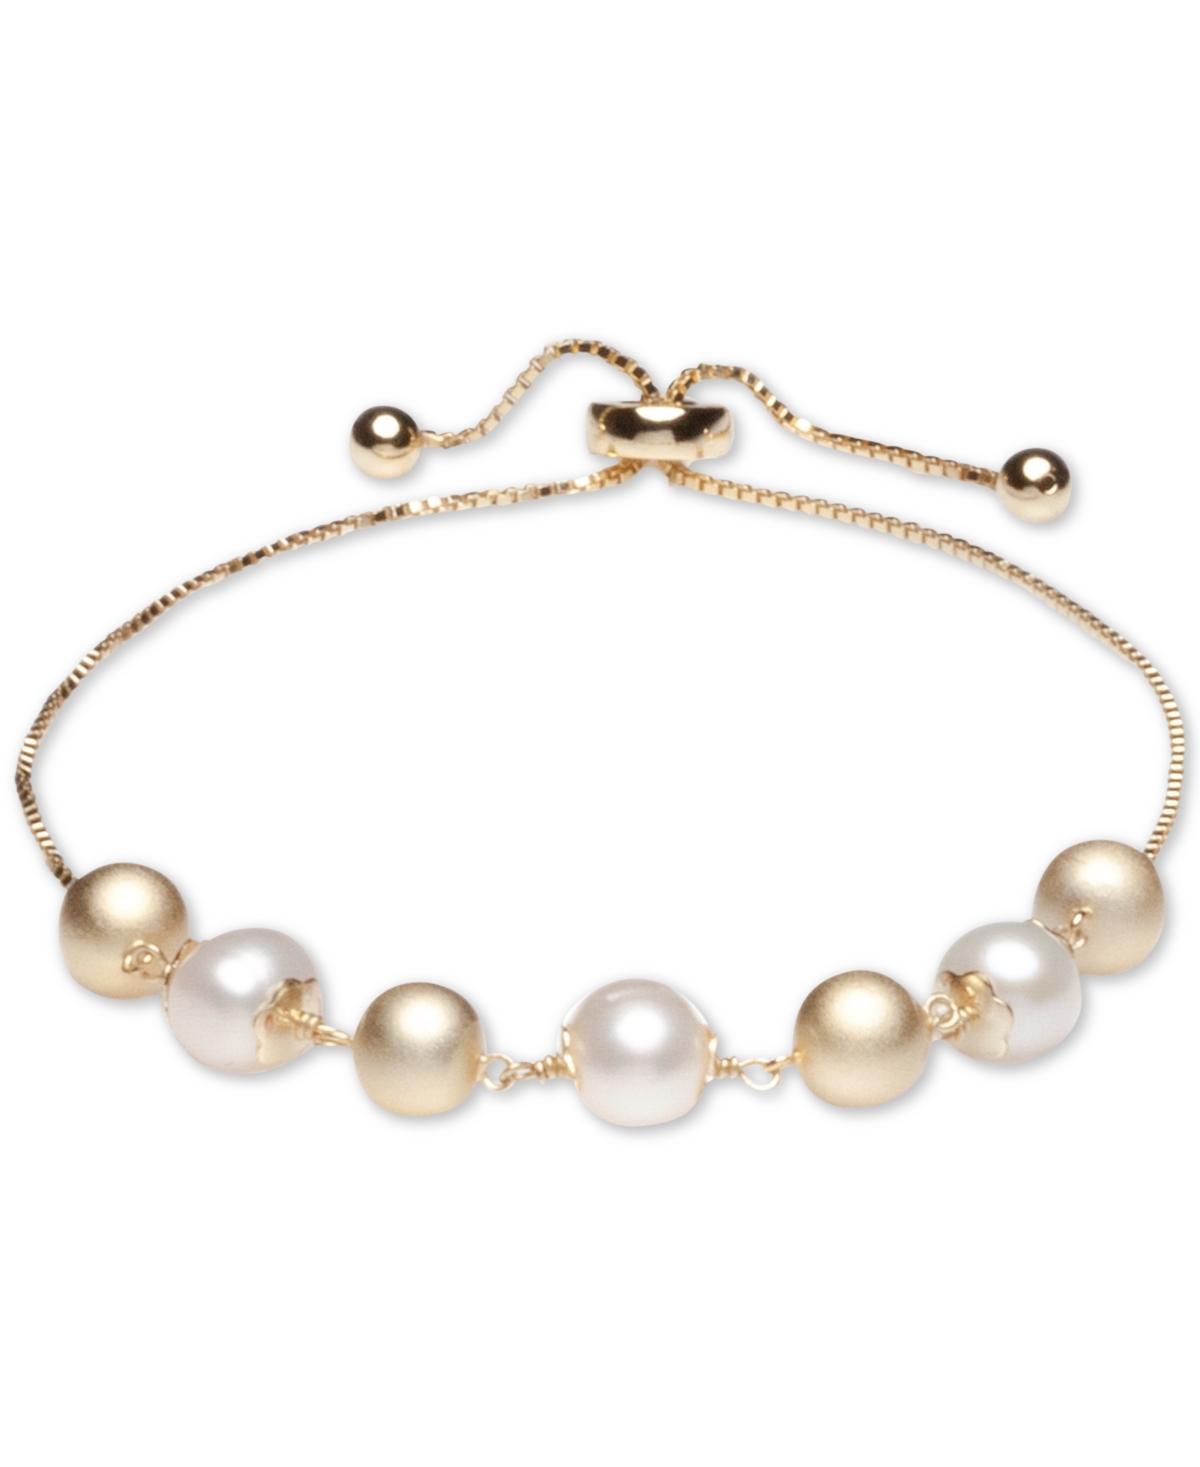 Cultured Freshwater Pearl (8mm) and Beads Bolo Bracelet in 18k Gold over Sterling Silver - Gold Over Silver